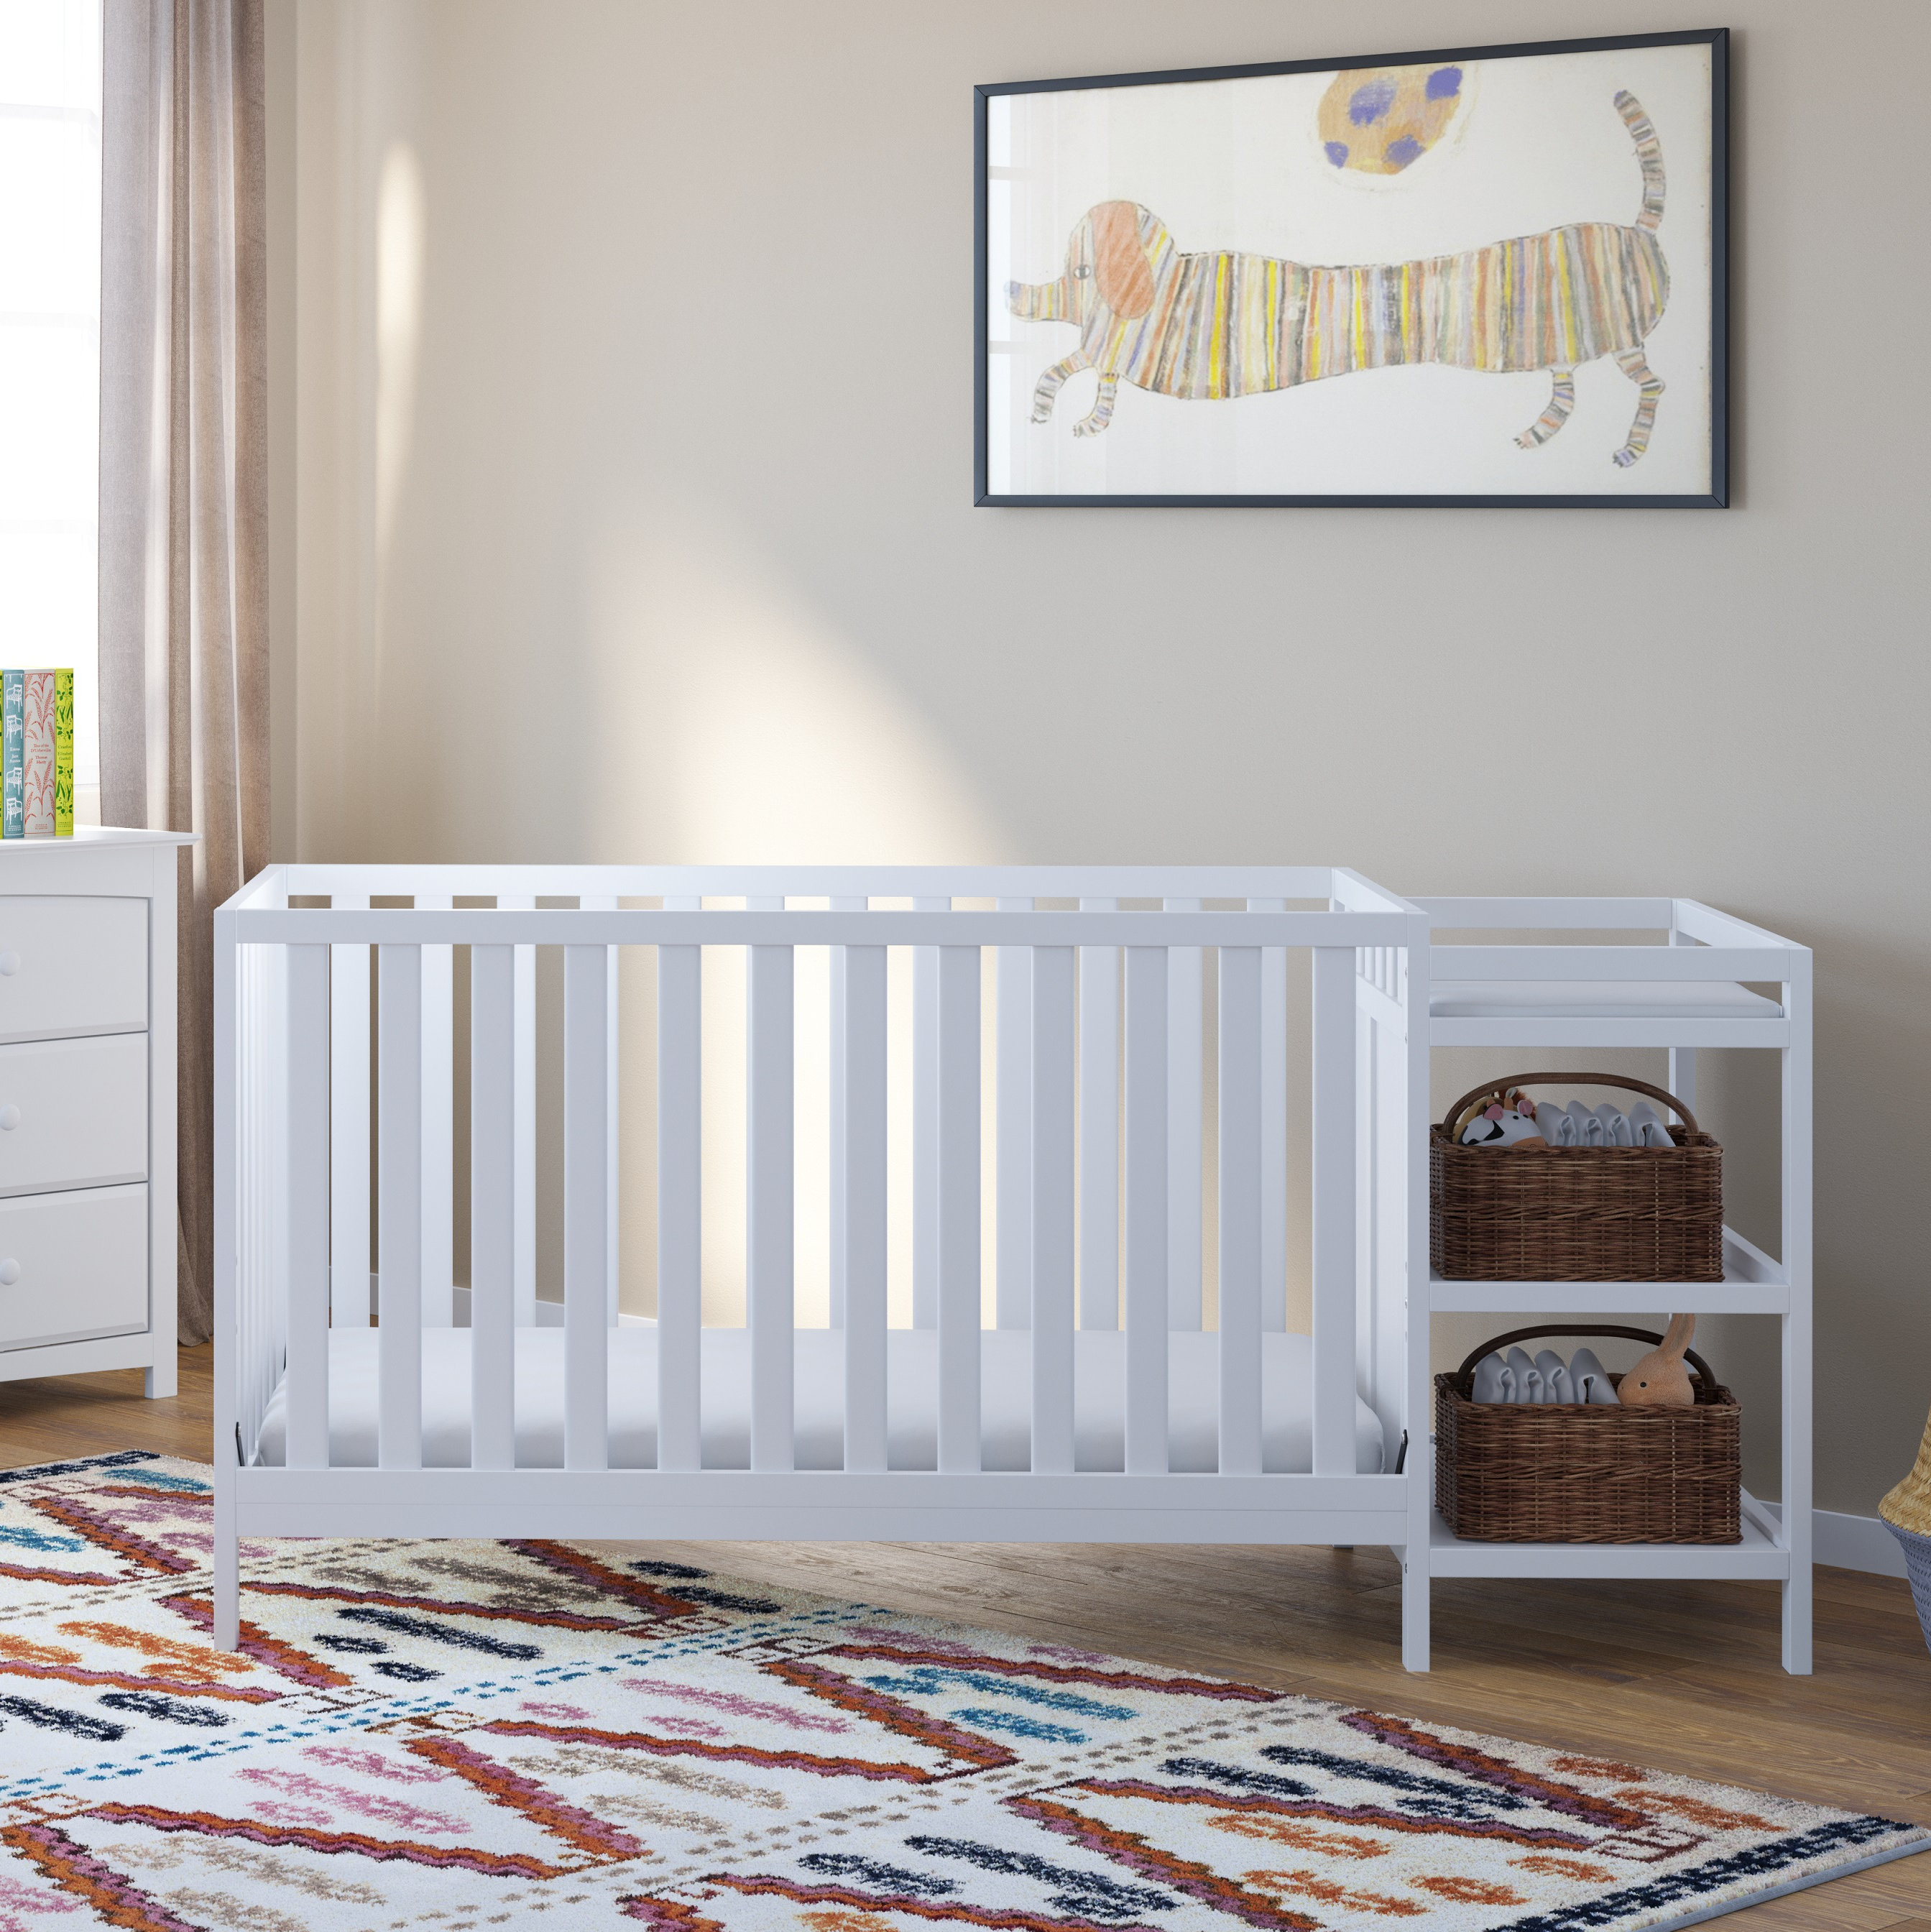 4 in 1 crib with changing table